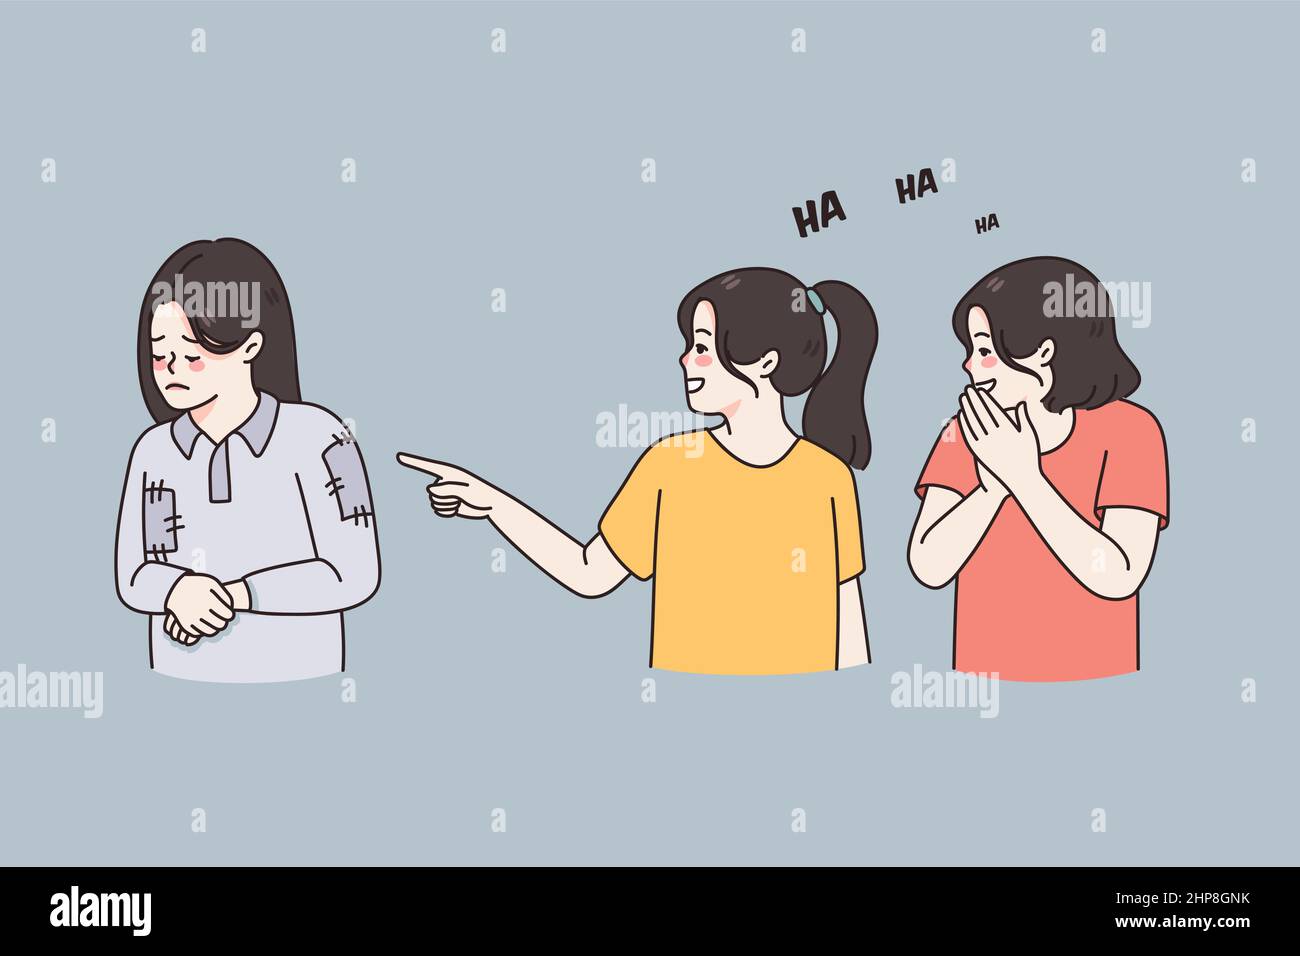 Small girls laugh at needy poor classmate Stock Vector